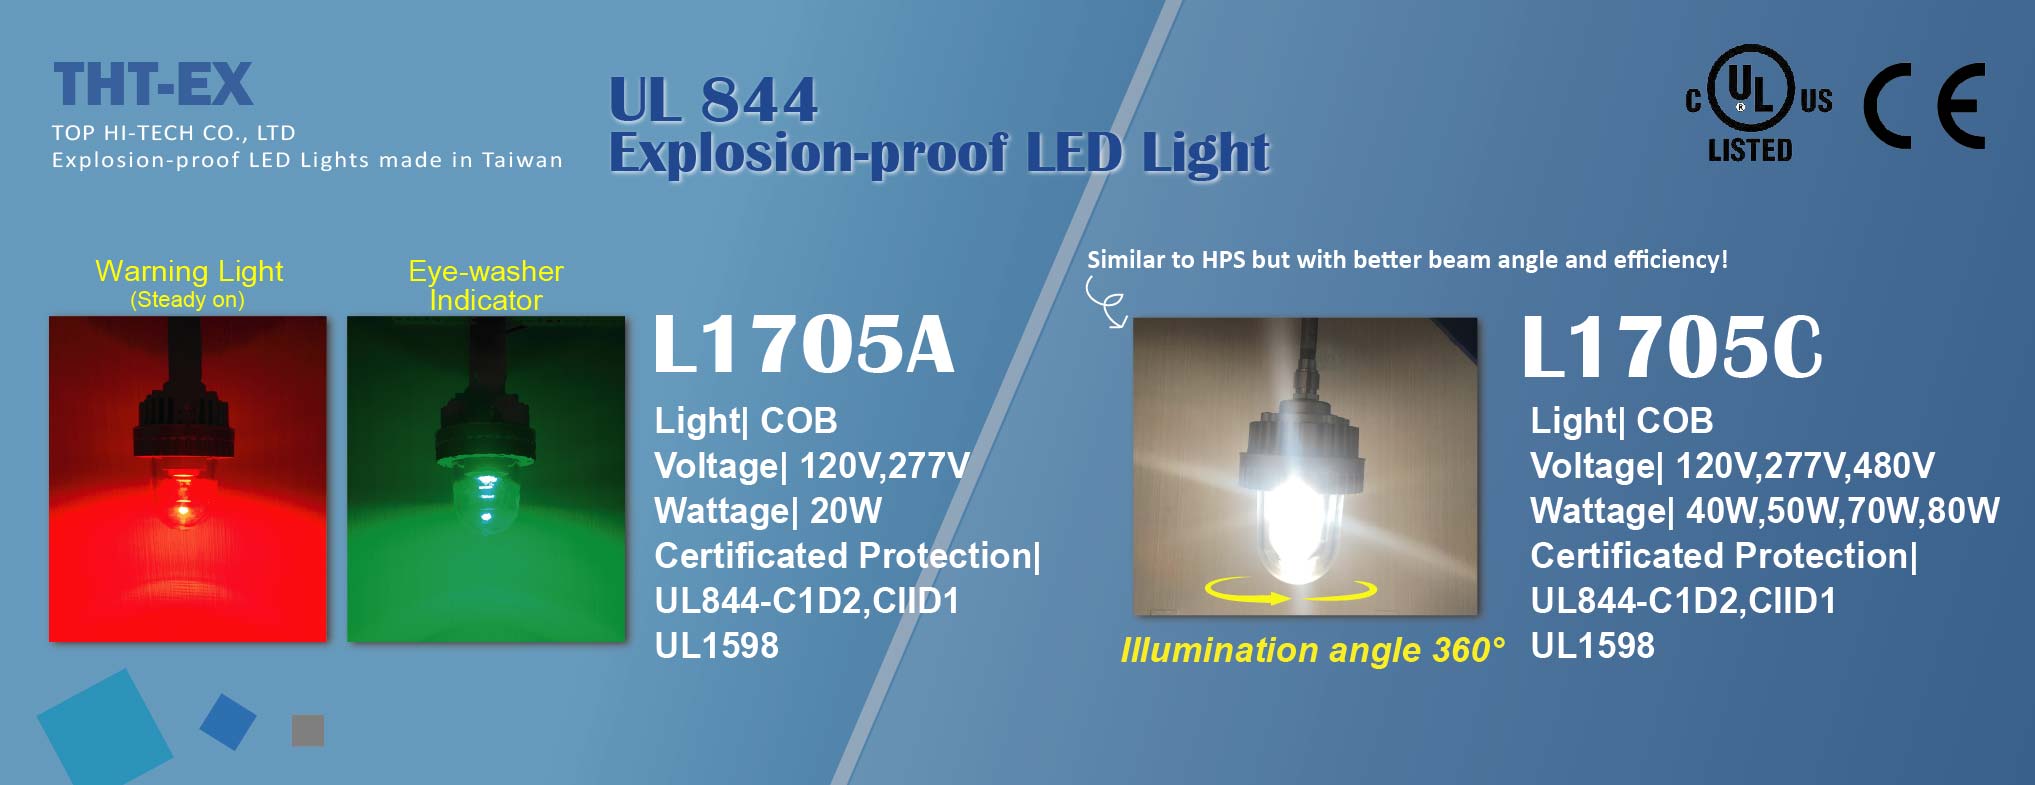 (UL844 C1.D2)186-degree omnidirectional projection of explosion-proof LED lighting